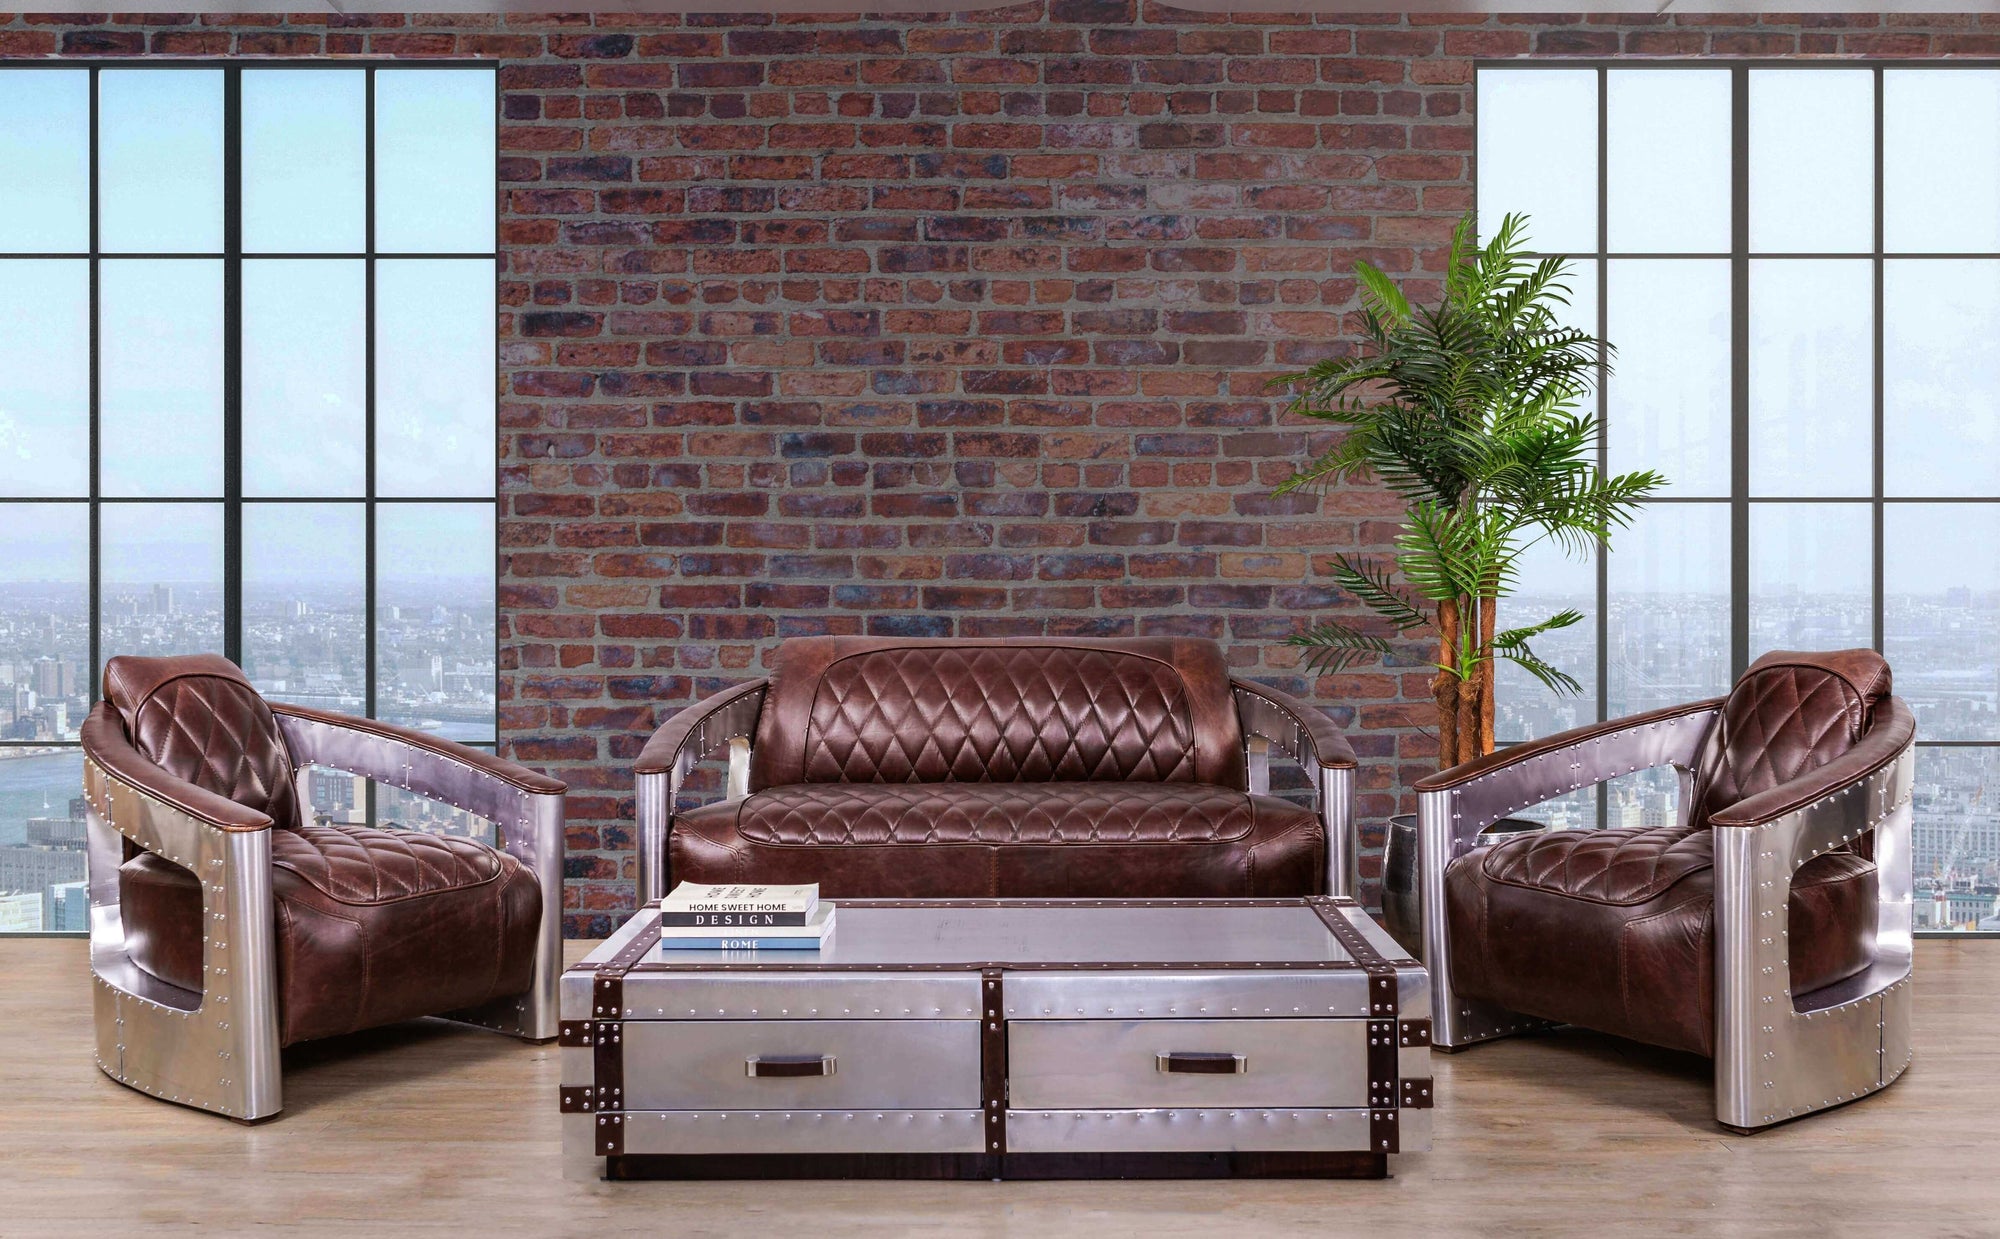 THE AVIATOR FURNITURE RANGE: FIND THE PERFECT STYLE